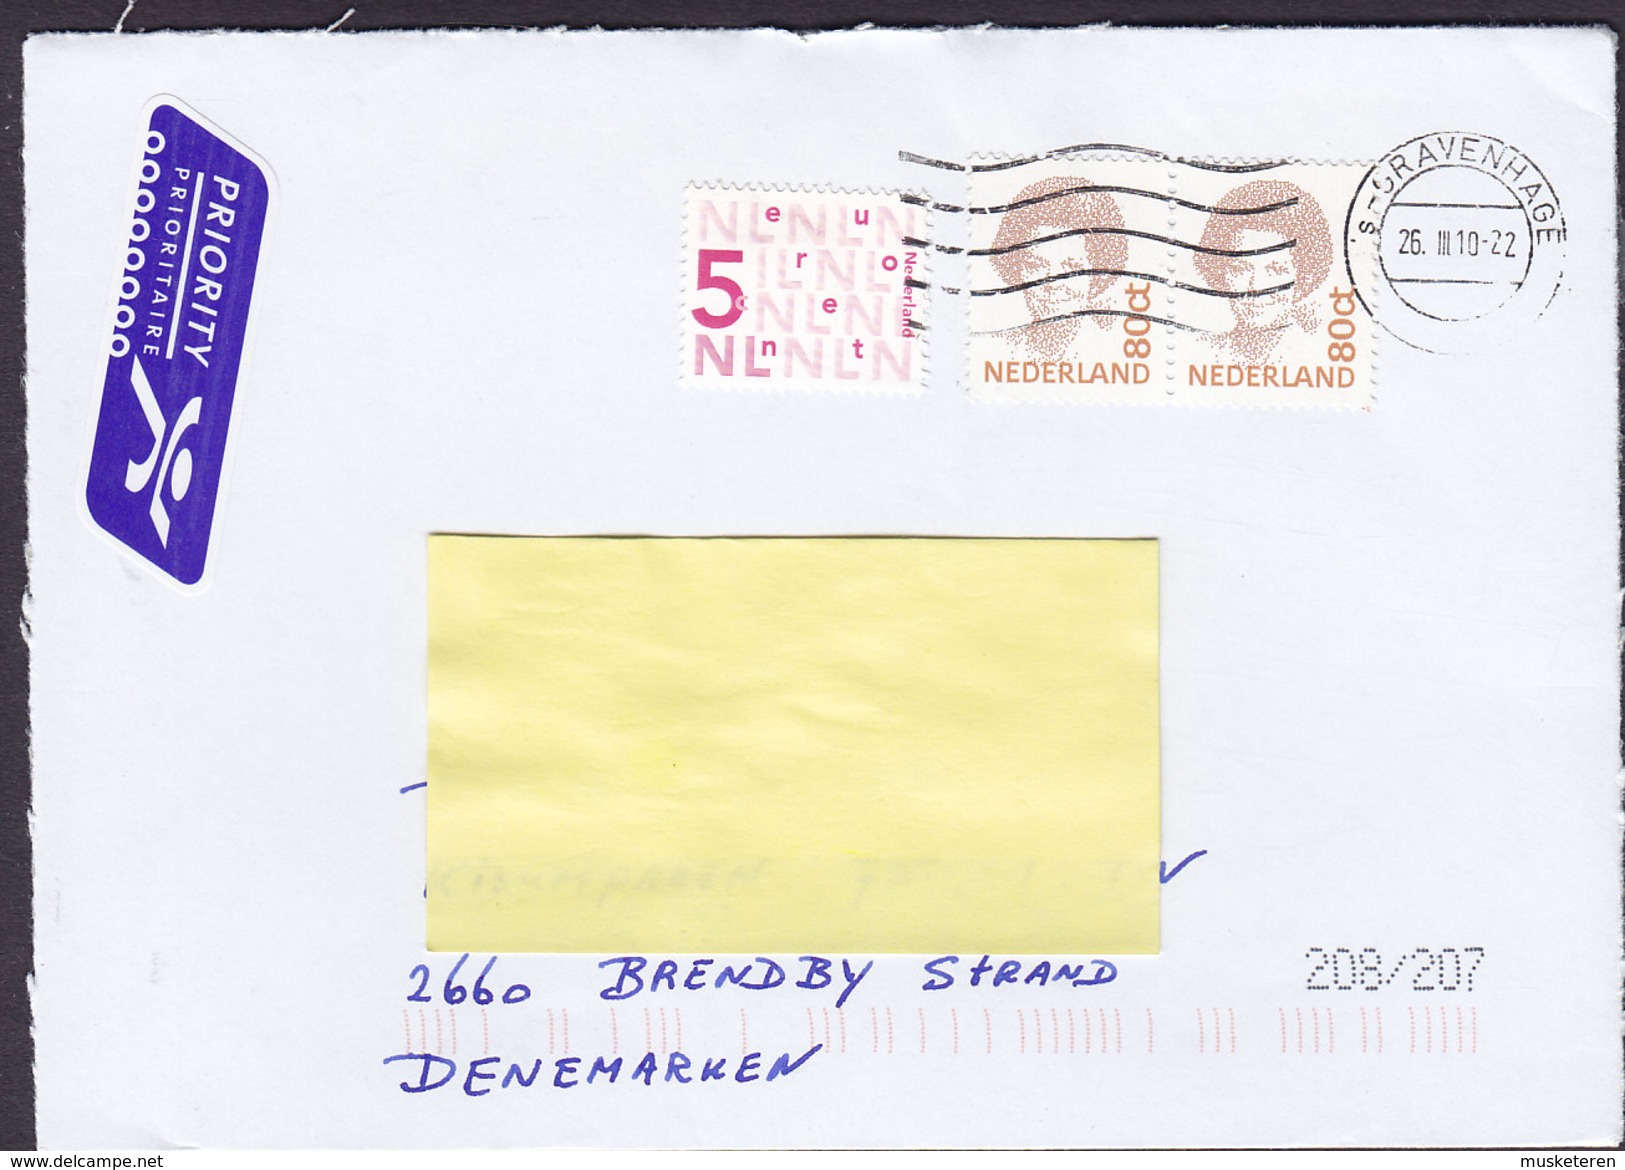 Netherlands PRIORITY Prioritaire Label 's-GRAVENHAGE 2010 Cover Brief BRØNDBY STRAND Denmark Beatrix Stamps - Covers & Documents